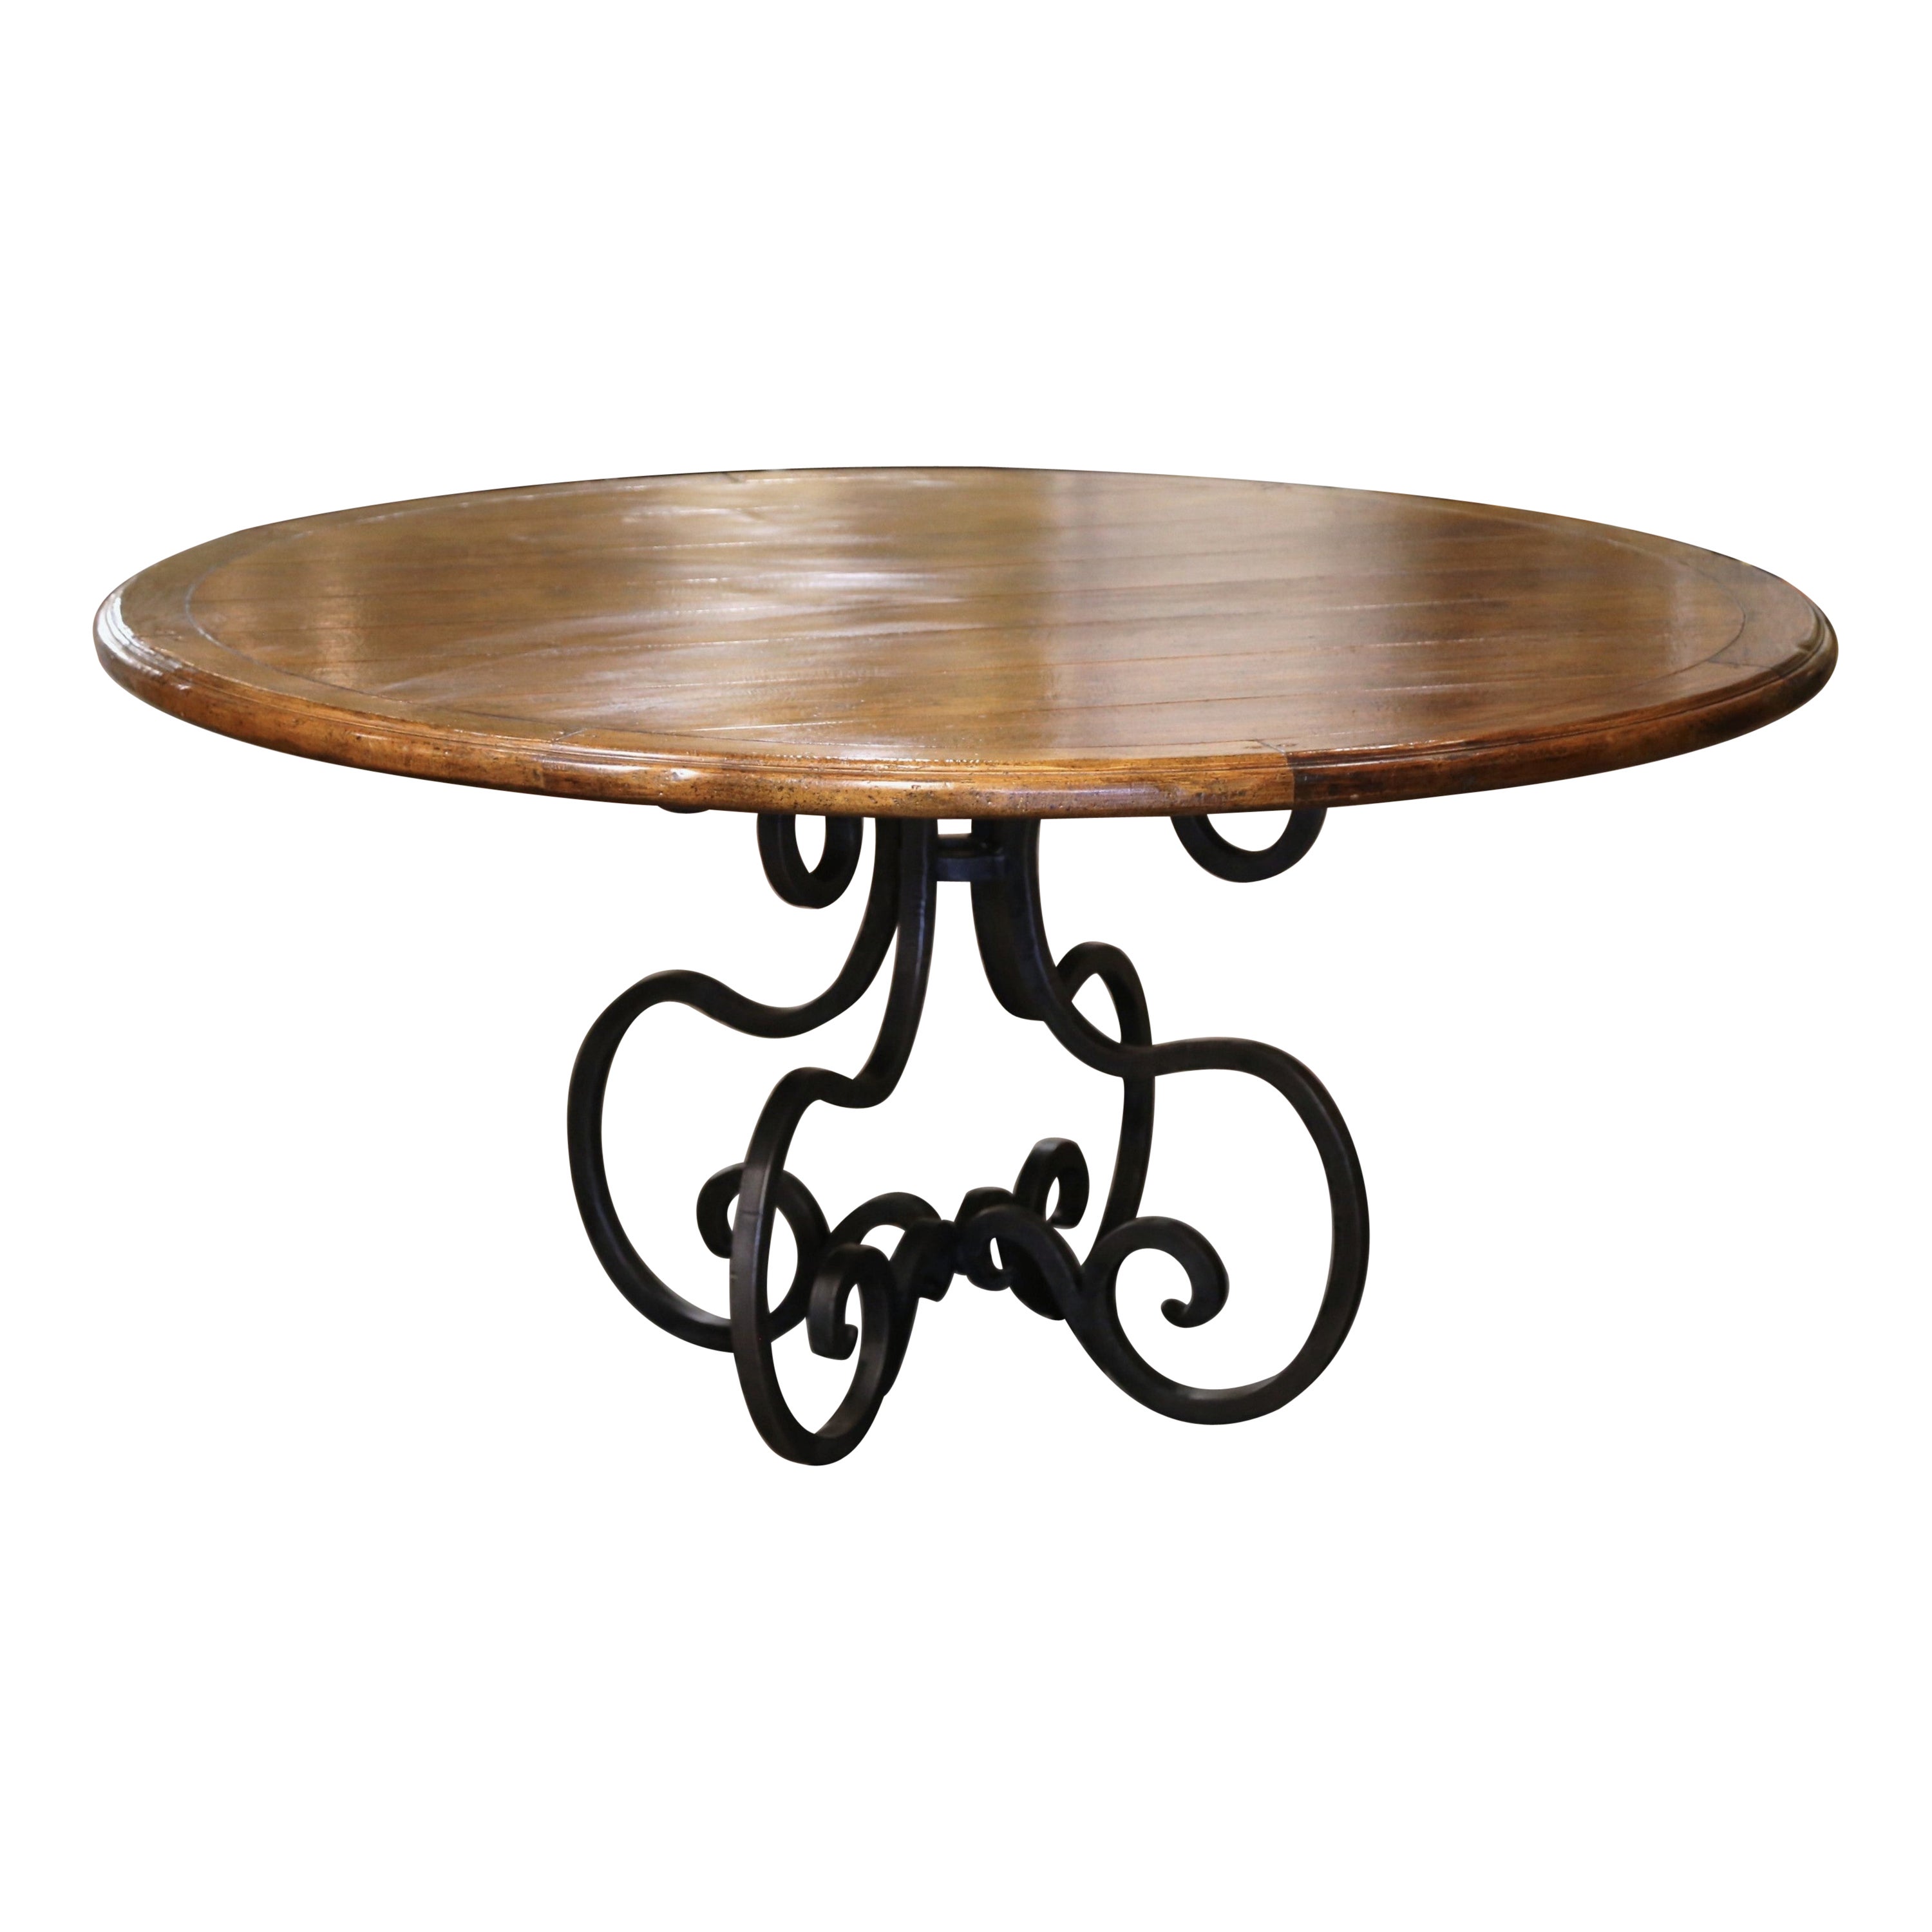 Vintage Carved Walnut Round Dining Table on Four-Leg Wrought Iron Base For Sale